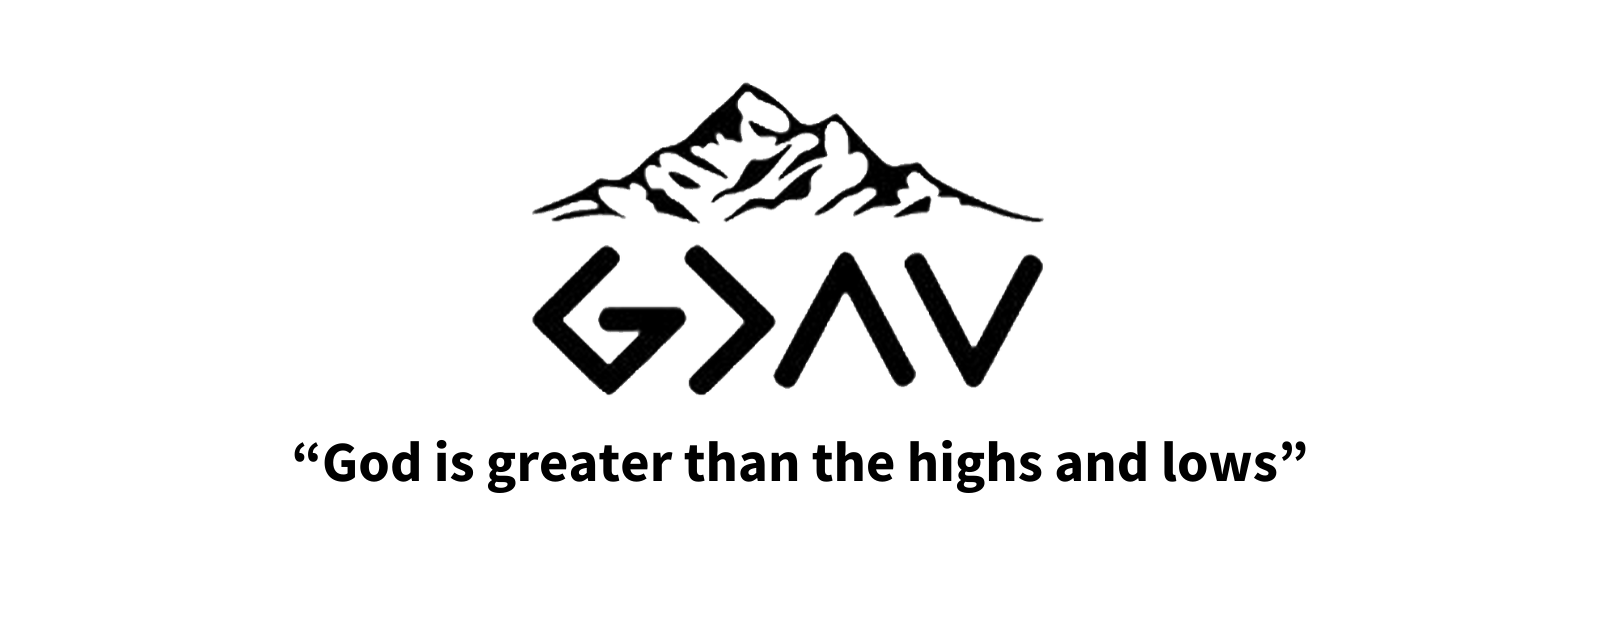  The Meaning Behind the Symbol “God is greater than the highs and lows"